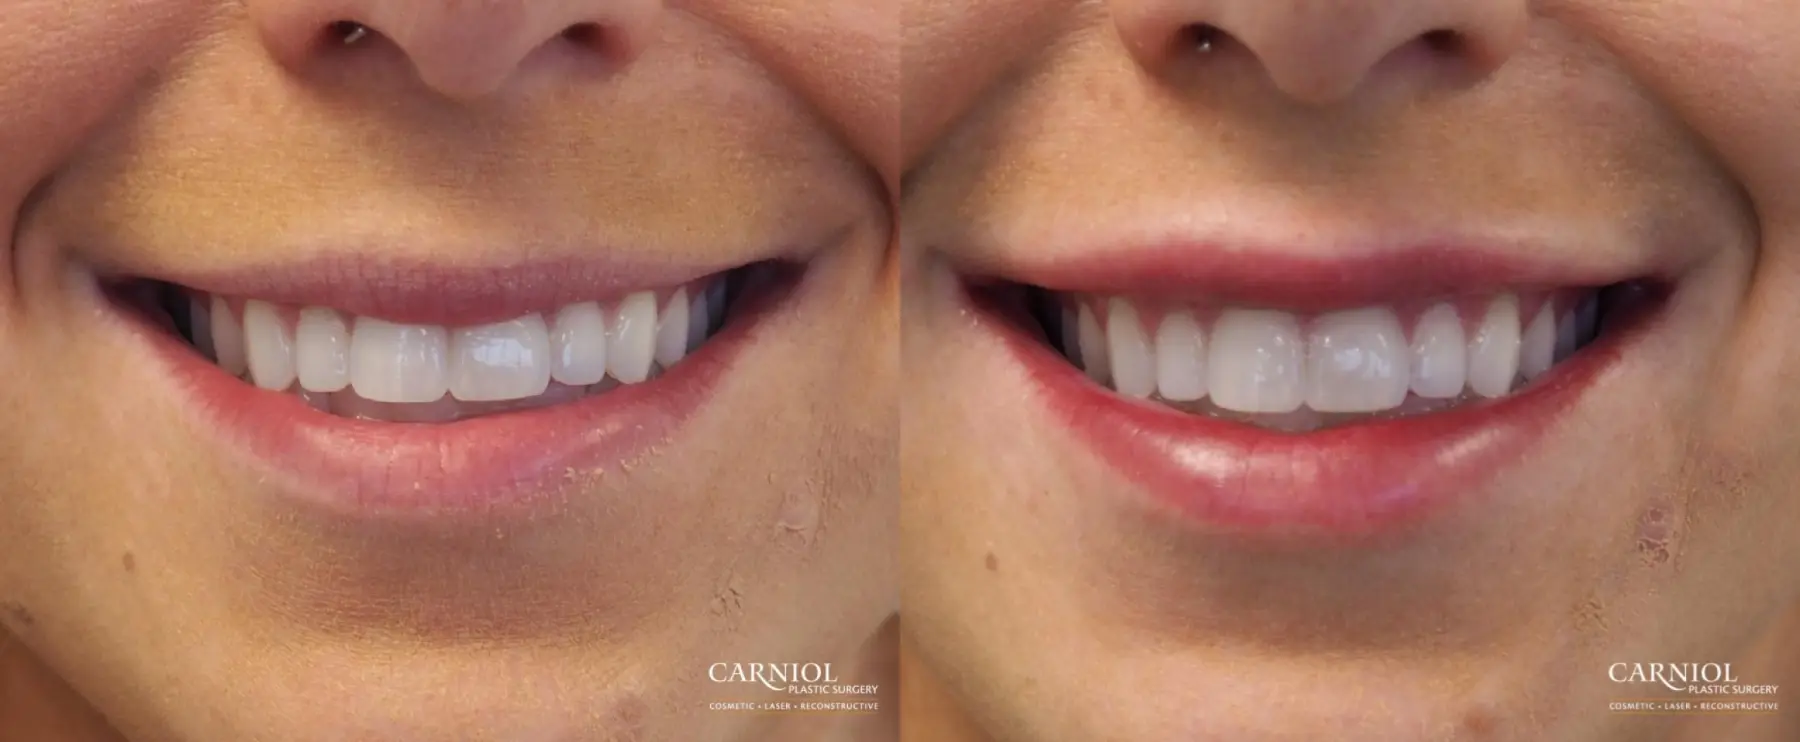 Lip Augmentation: Patient 7 - Before and After 1